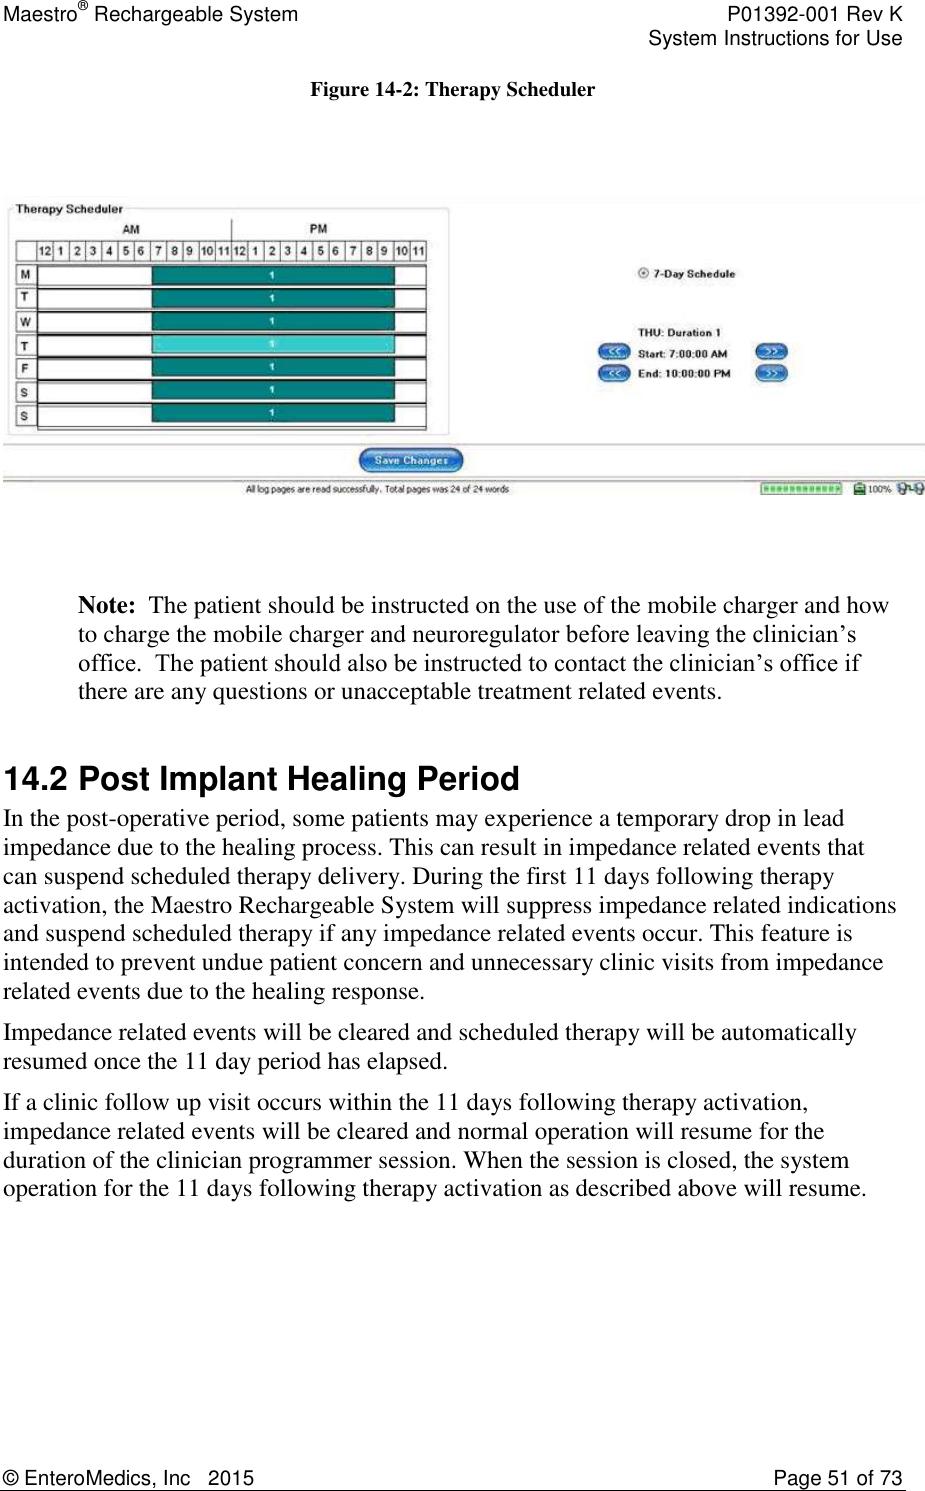 Maestro® Rechargeable System    P01392-001 Rev K     System Instructions for Use  © EnteroMedics, Inc   2015  Page 51 of 73  Figure 14-2: Therapy Scheduler      Note:  The patient should be instructed on the use of the mobile charger and how to charge the mobile charger and neuroregulator before leaving the clinician’s office.  The patient should also be instructed to contact the clinician’s office if there are any questions or unacceptable treatment related events.  14.2 Post Implant Healing Period In the post-operative period, some patients may experience a temporary drop in lead impedance due to the healing process. This can result in impedance related events that can suspend scheduled therapy delivery. During the first 11 days following therapy activation, the Maestro Rechargeable System will suppress impedance related indications and suspend scheduled therapy if any impedance related events occur. This feature is intended to prevent undue patient concern and unnecessary clinic visits from impedance related events due to the healing response. Impedance related events will be cleared and scheduled therapy will be automatically resumed once the 11 day period has elapsed. If a clinic follow up visit occurs within the 11 days following therapy activation, impedance related events will be cleared and normal operation will resume for the duration of the clinician programmer session. When the session is closed, the system operation for the 11 days following therapy activation as described above will resume. 